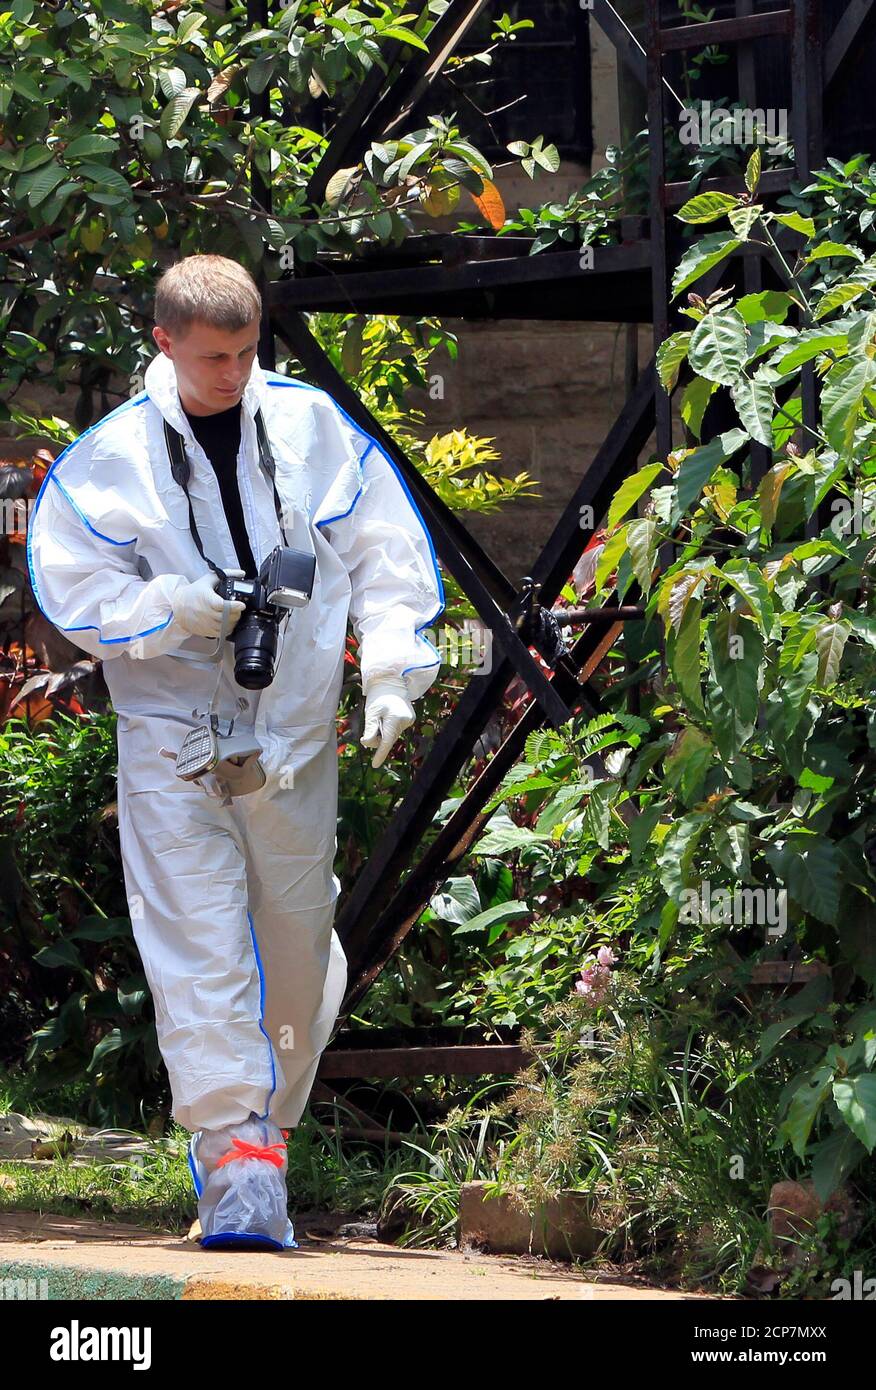 A foreign forensic expert arrives to collect data on three dead victims of the attack on Westgate shopping mall last week, at the Nairobi City Mortuary September 26, 2013. U.S., British, Canadian and Israeli agencies are helping Kenya investigate the attack claimed by Somali Islamist militants on the Nairobi shopping mall that killed at least 72 people and destroyed part of the complex, officials said on Wednesday.          REUTERS/Noor Khamis (KENYA - Tags: CRIME LAW CIVIL UNREST DISASTER) Stock Photo